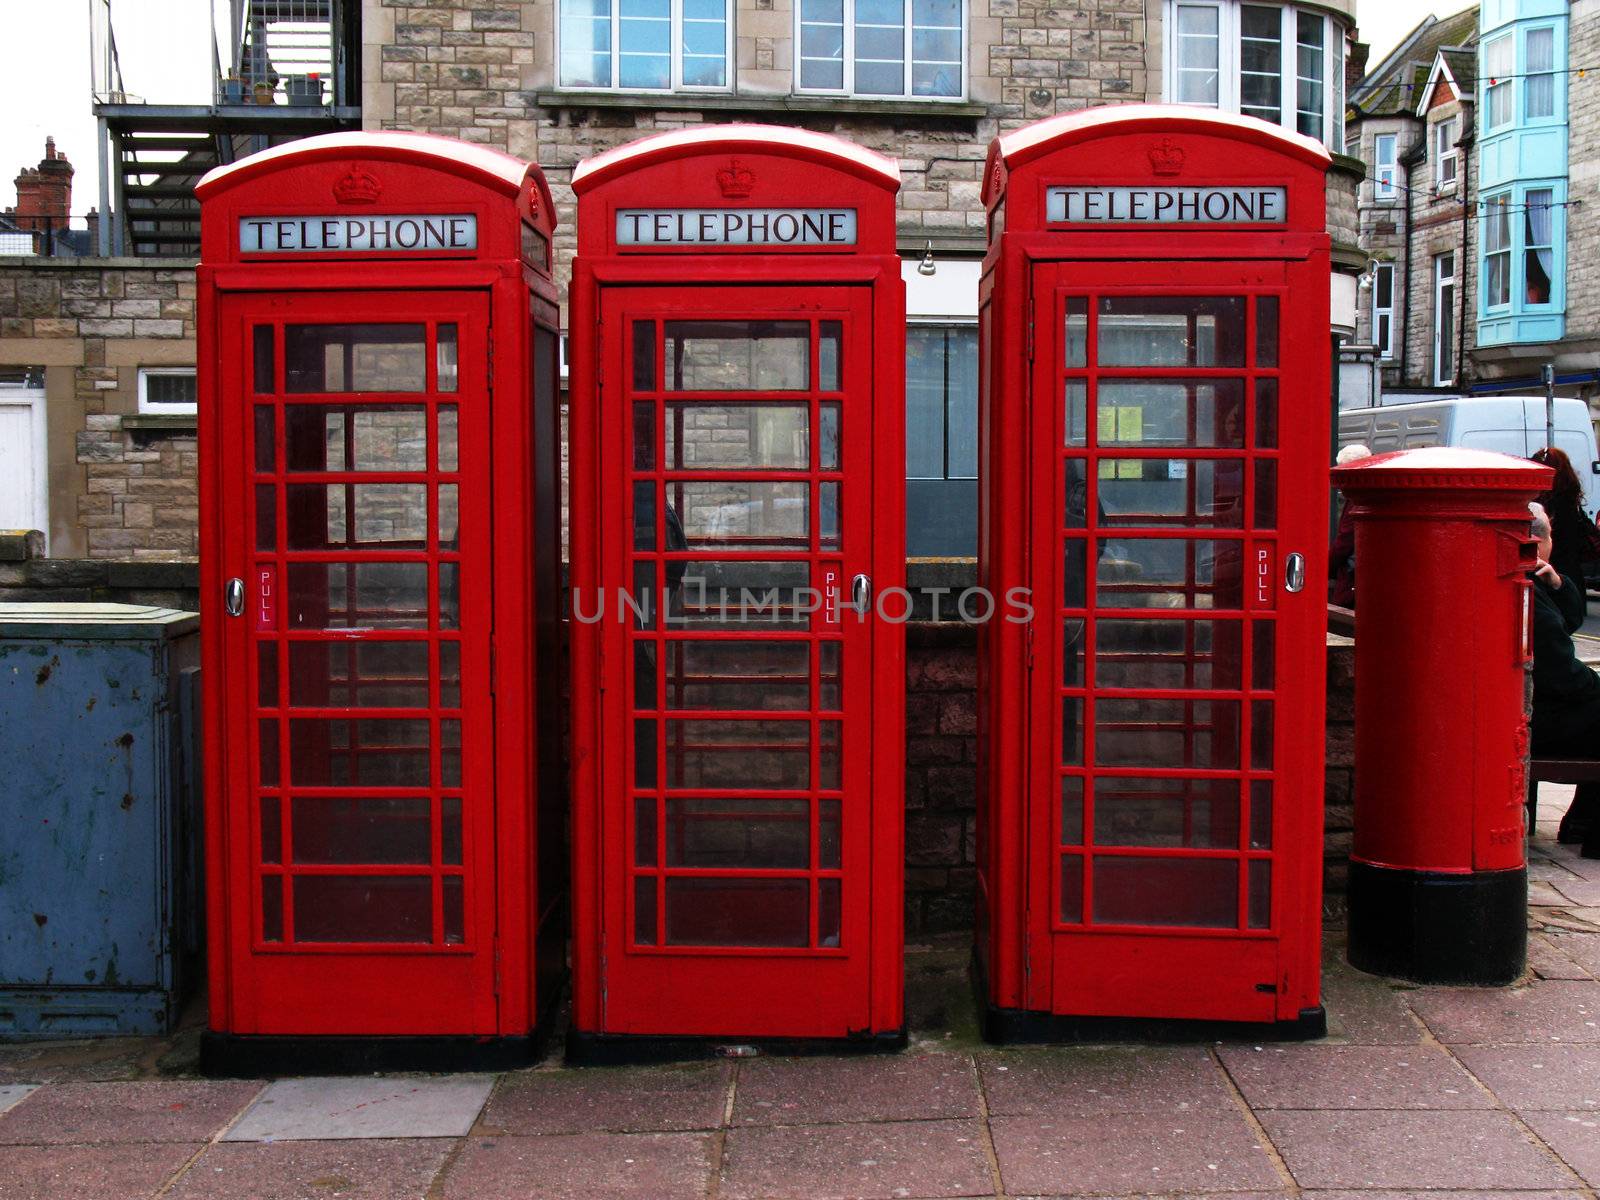 Three telephone boxes and a post box